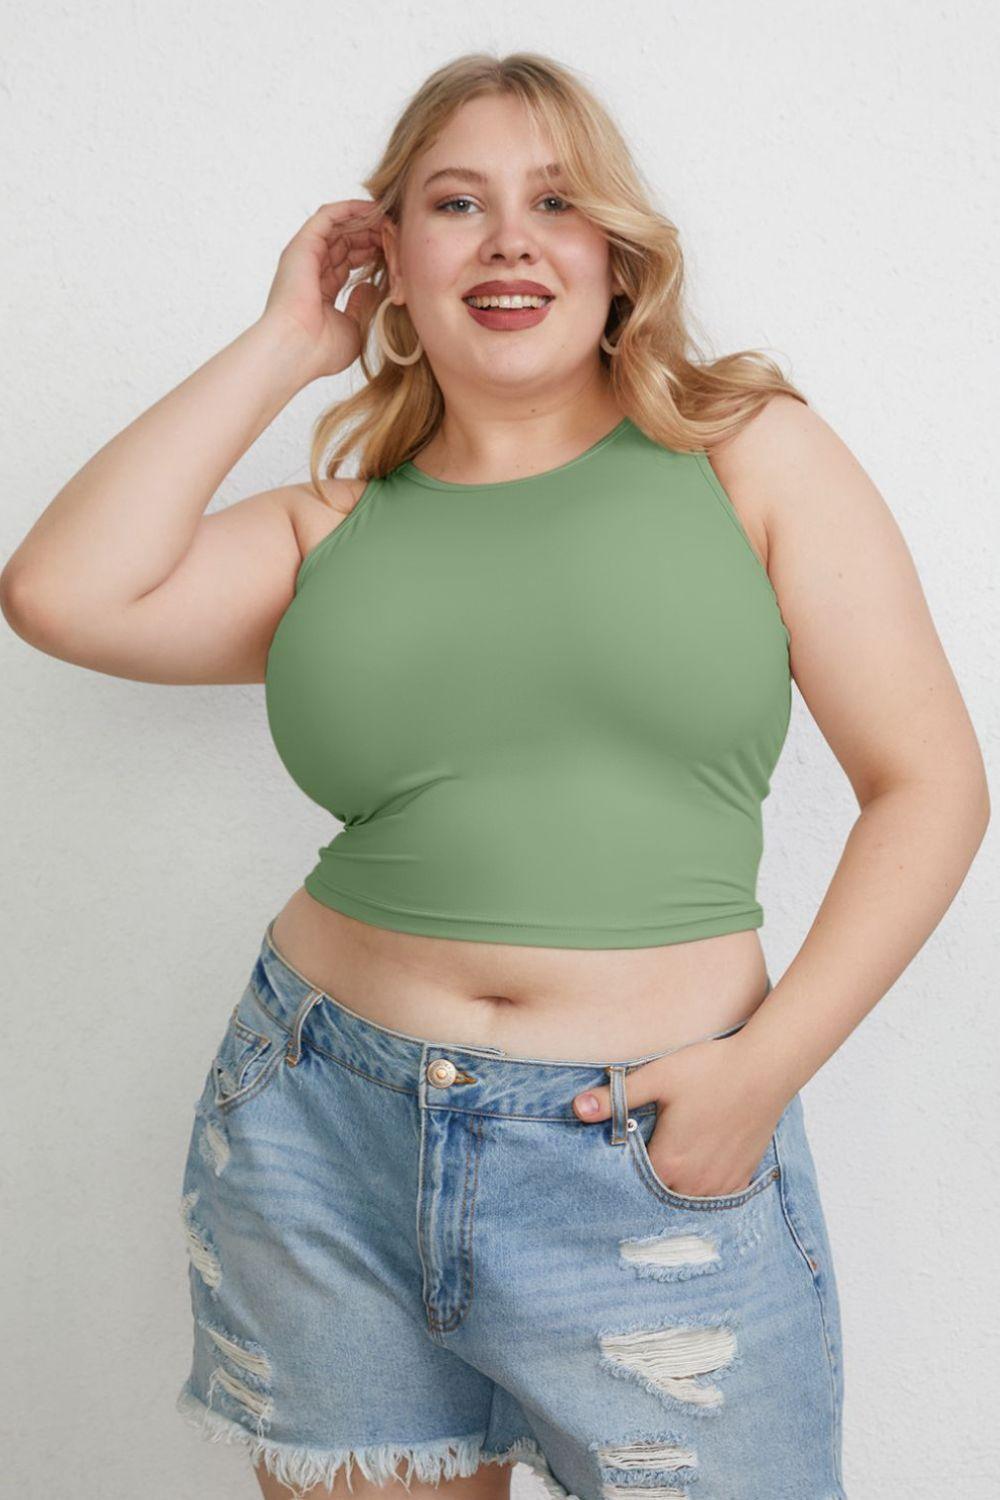 a woman in a green top posing for a picture